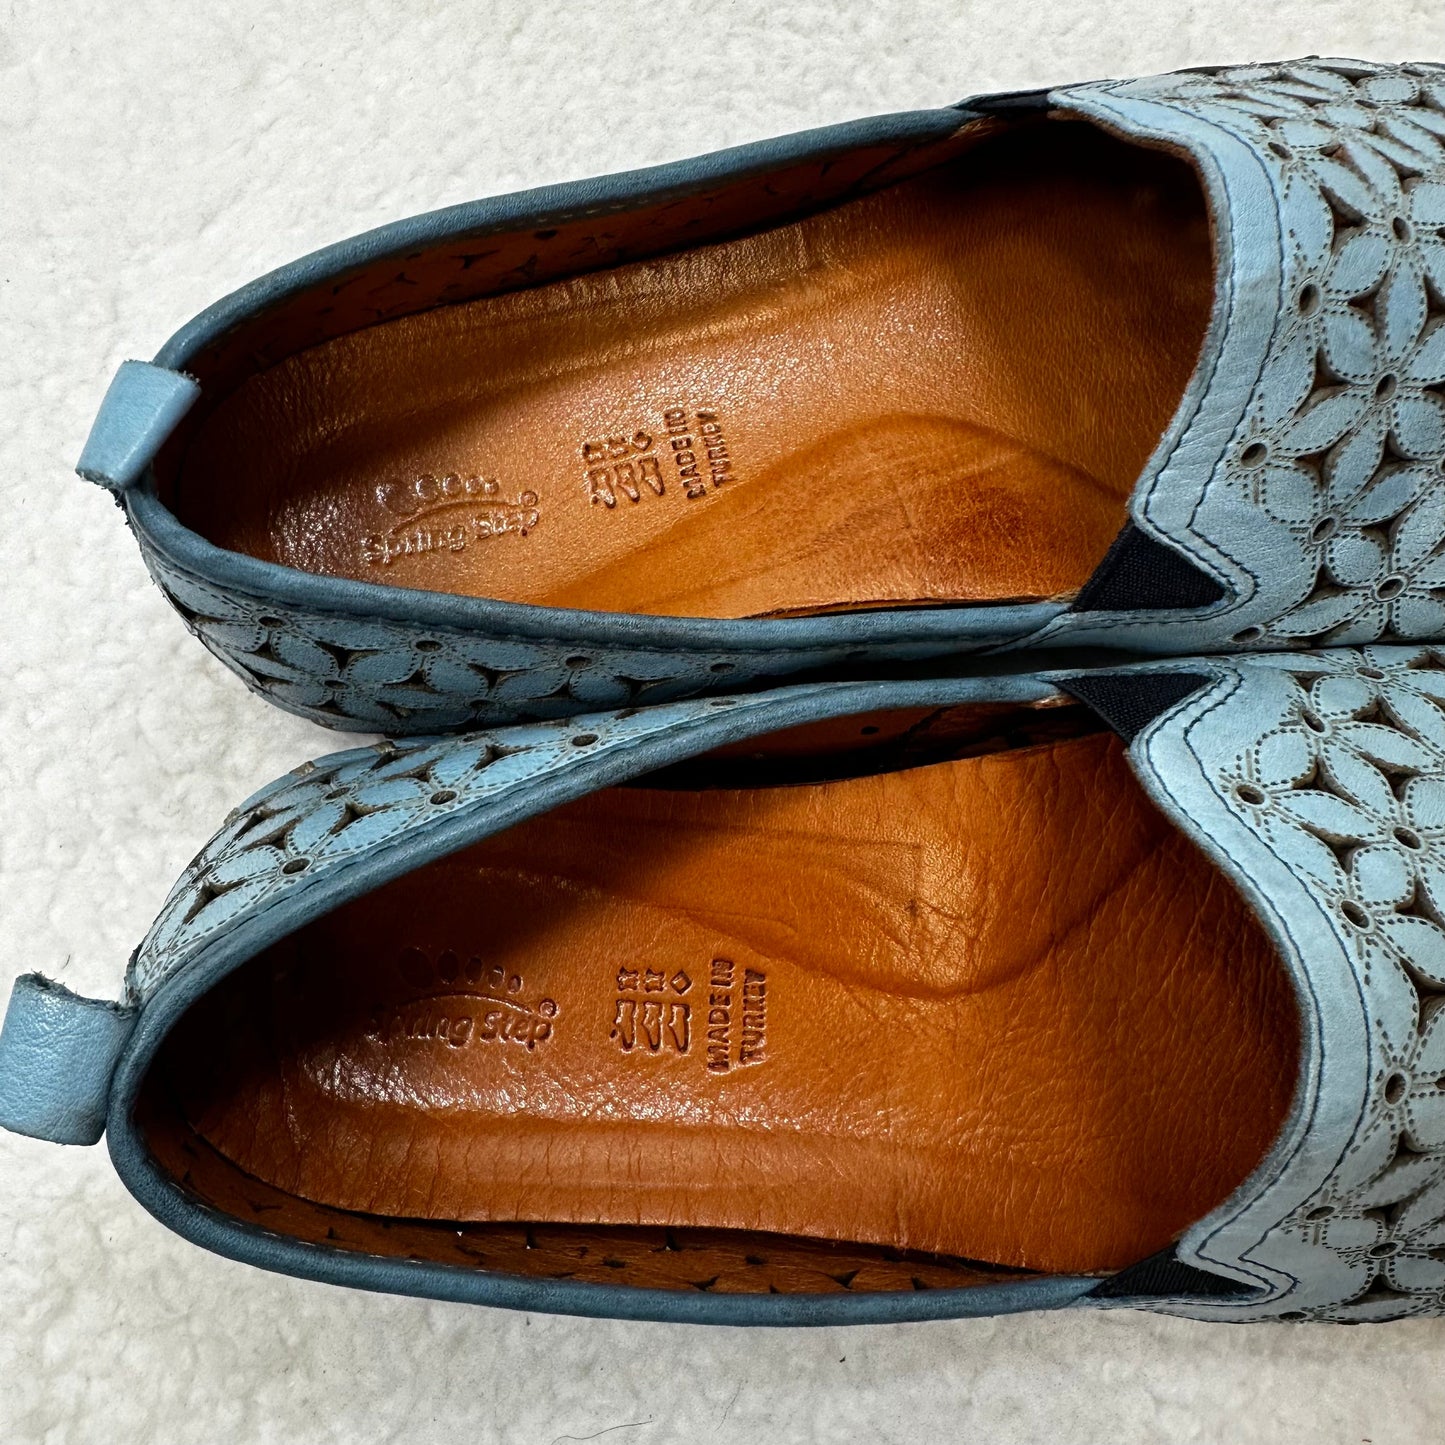 Blue Shoes Flats Loafer Oxford Spring Step, Size 9.5